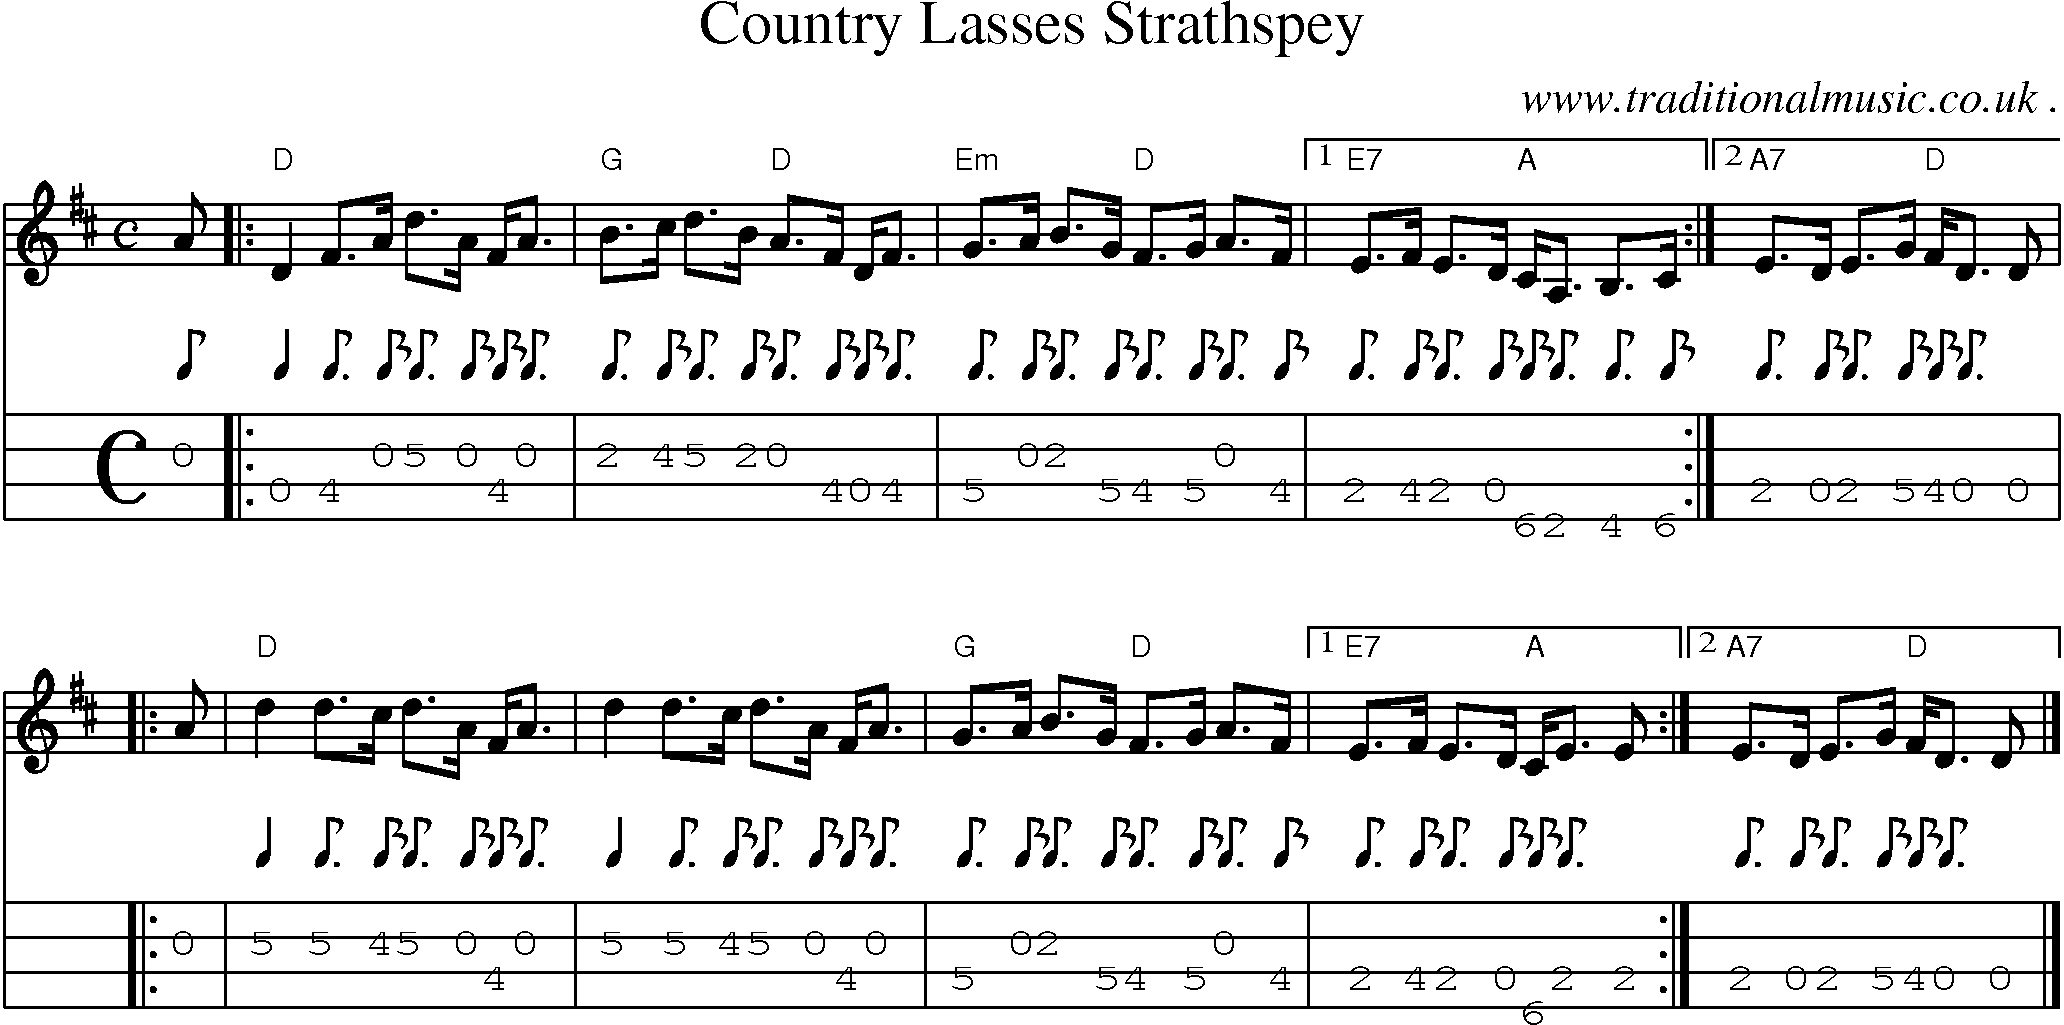 Sheet-music  score, Chords and Mandolin Tabs for Country Lasses Strathspey